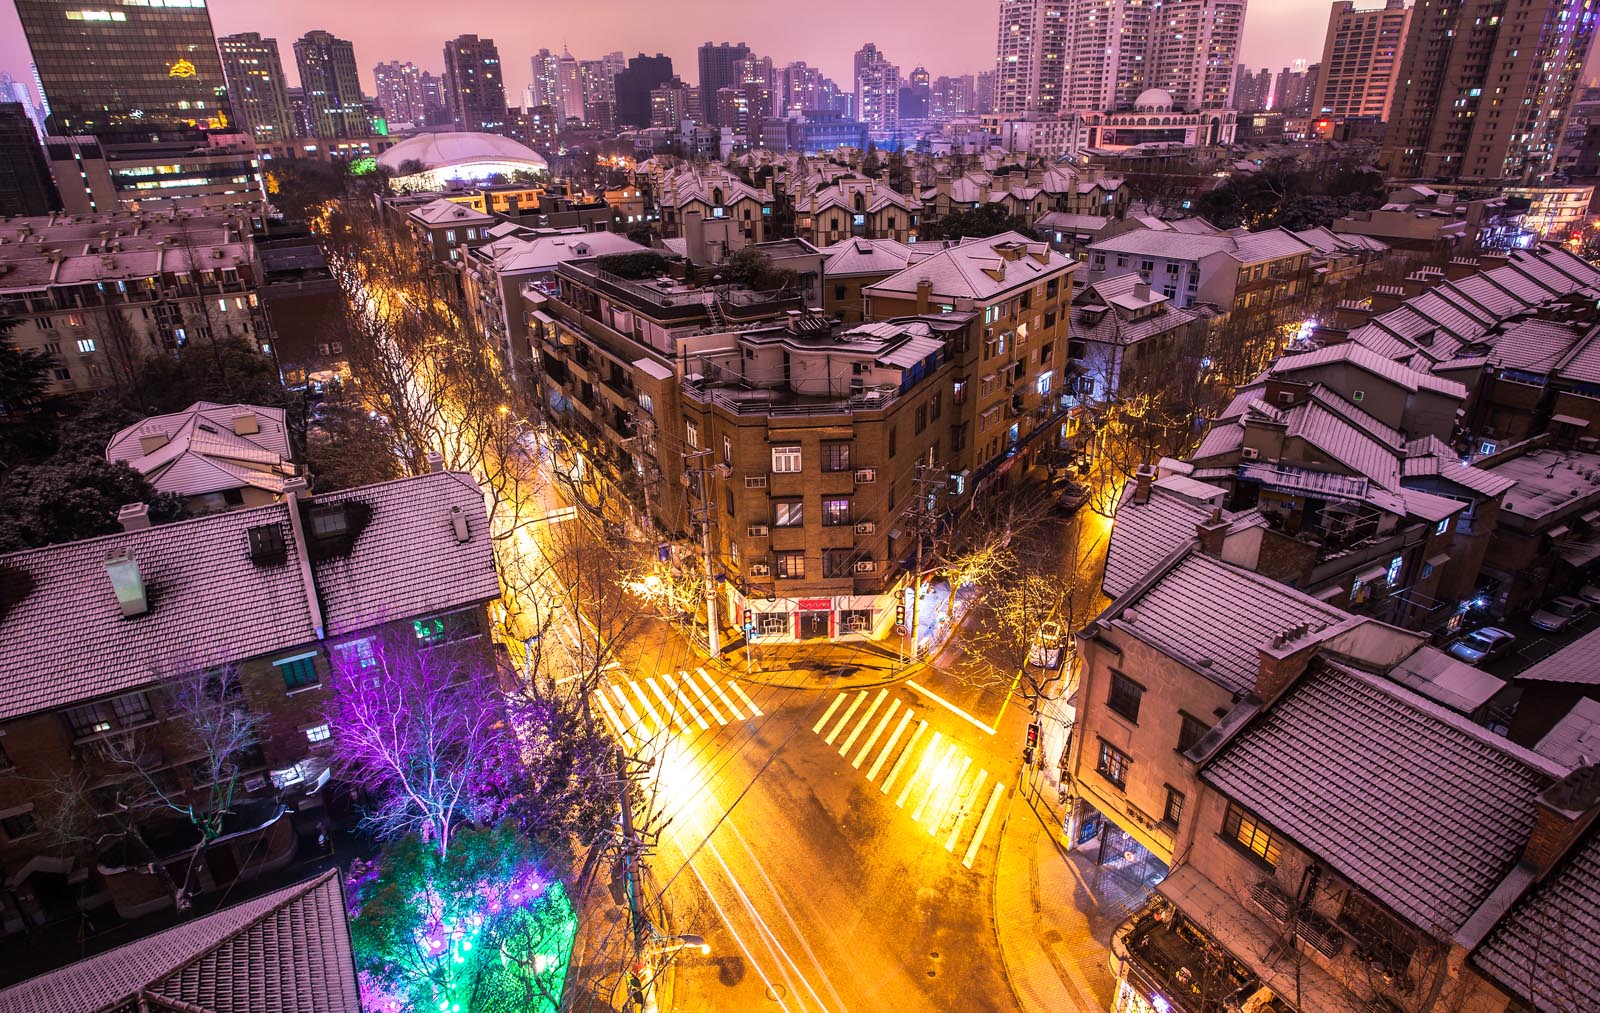 Intersection of low-rise buildings in Shanghai's Former French Concession neighbourhood on a snowy night